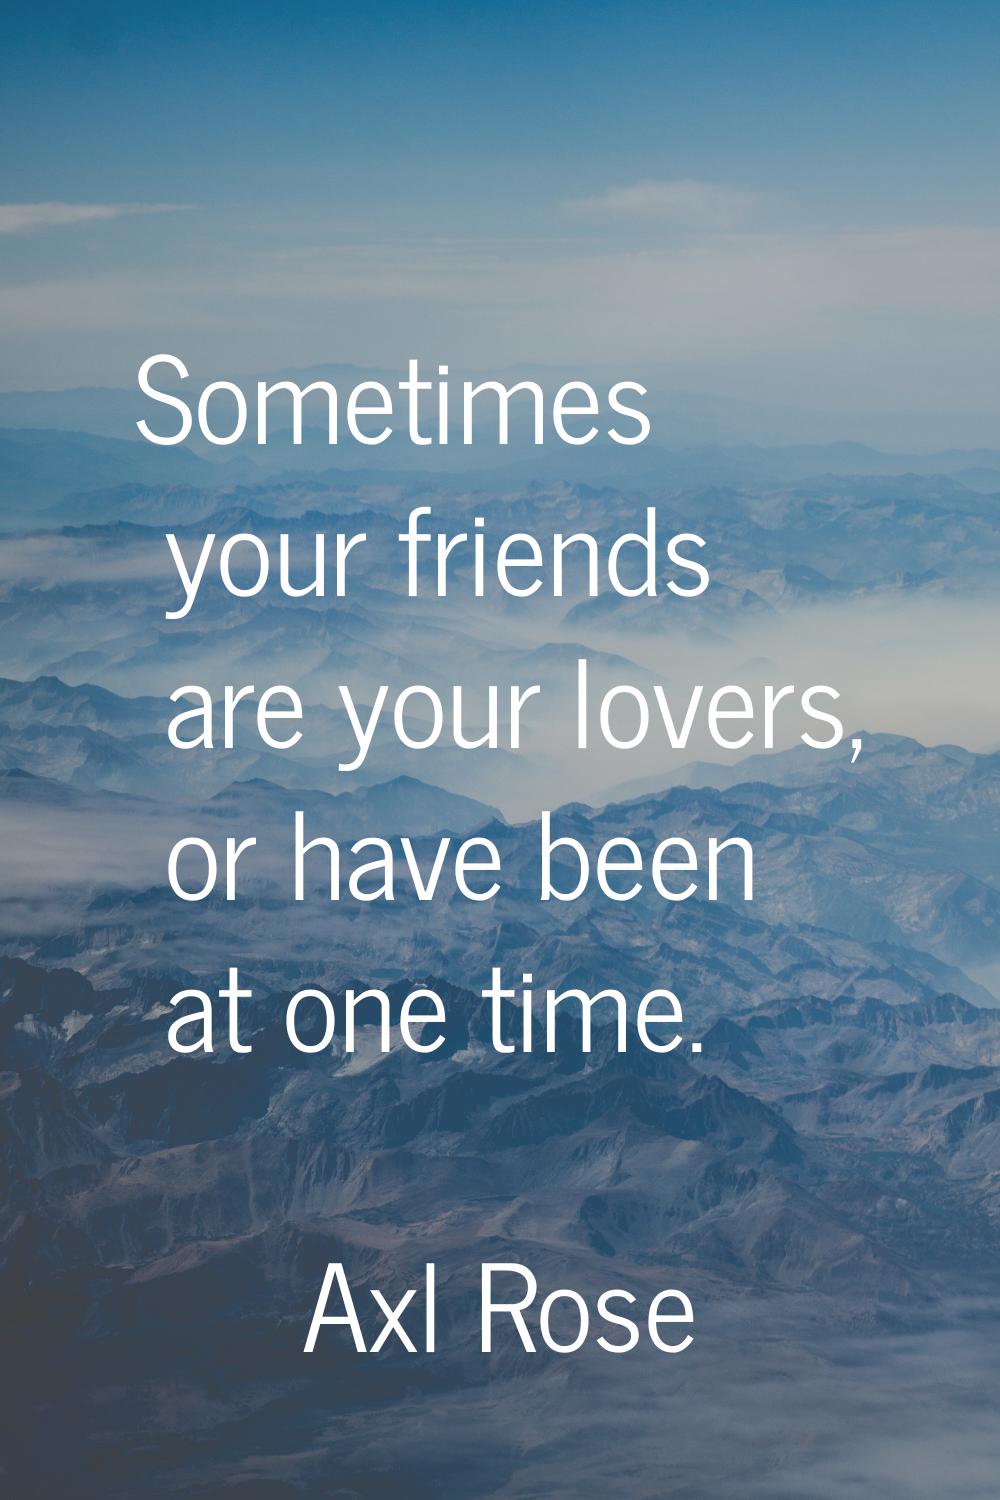 Sometimes your friends are your lovers, or have been at one time.